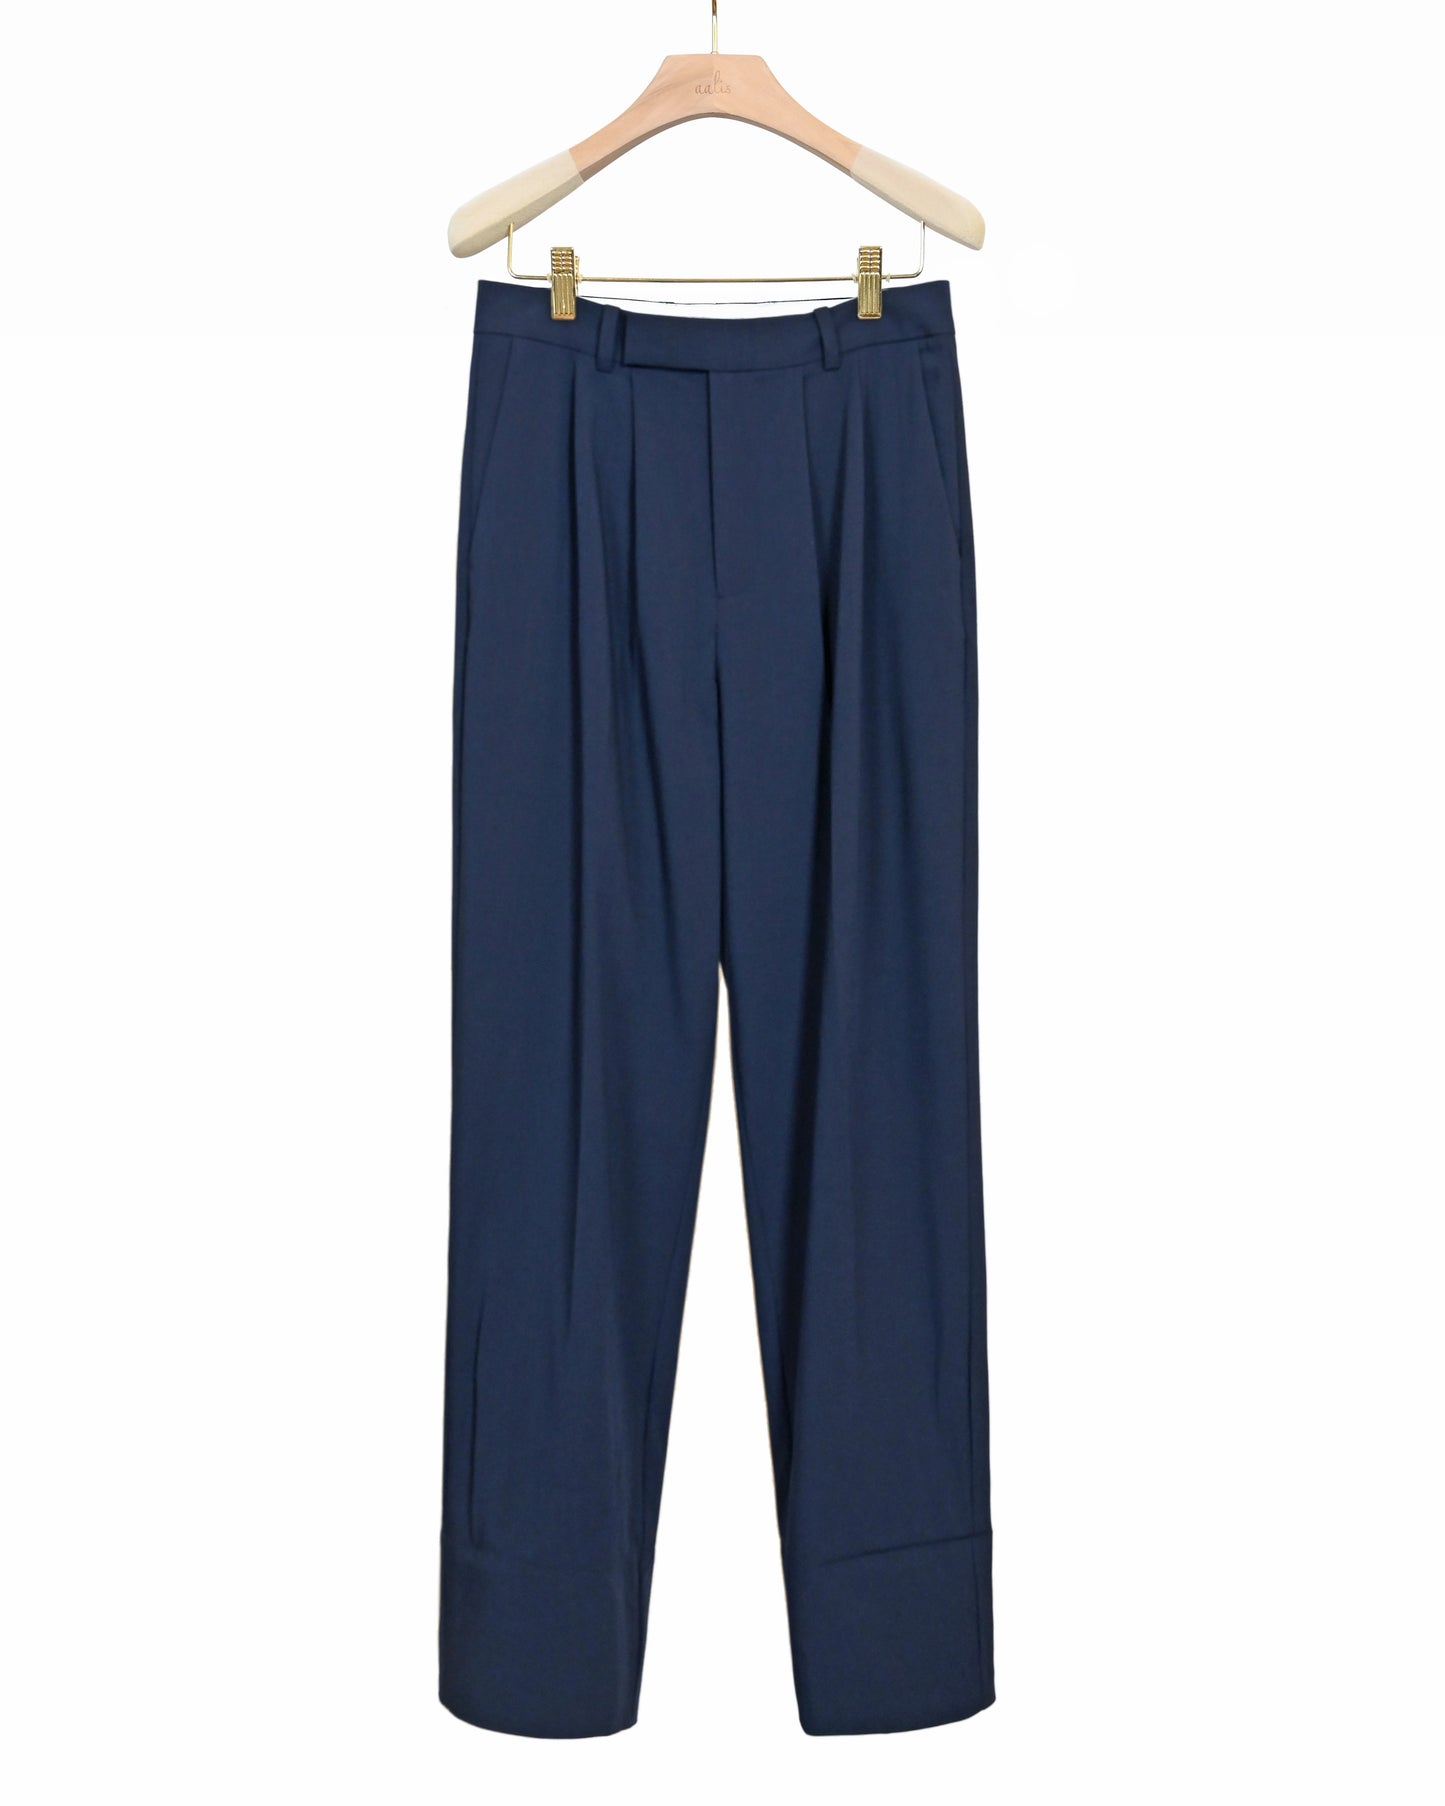 aalis LIZ white cuff suiting pants (Navy)